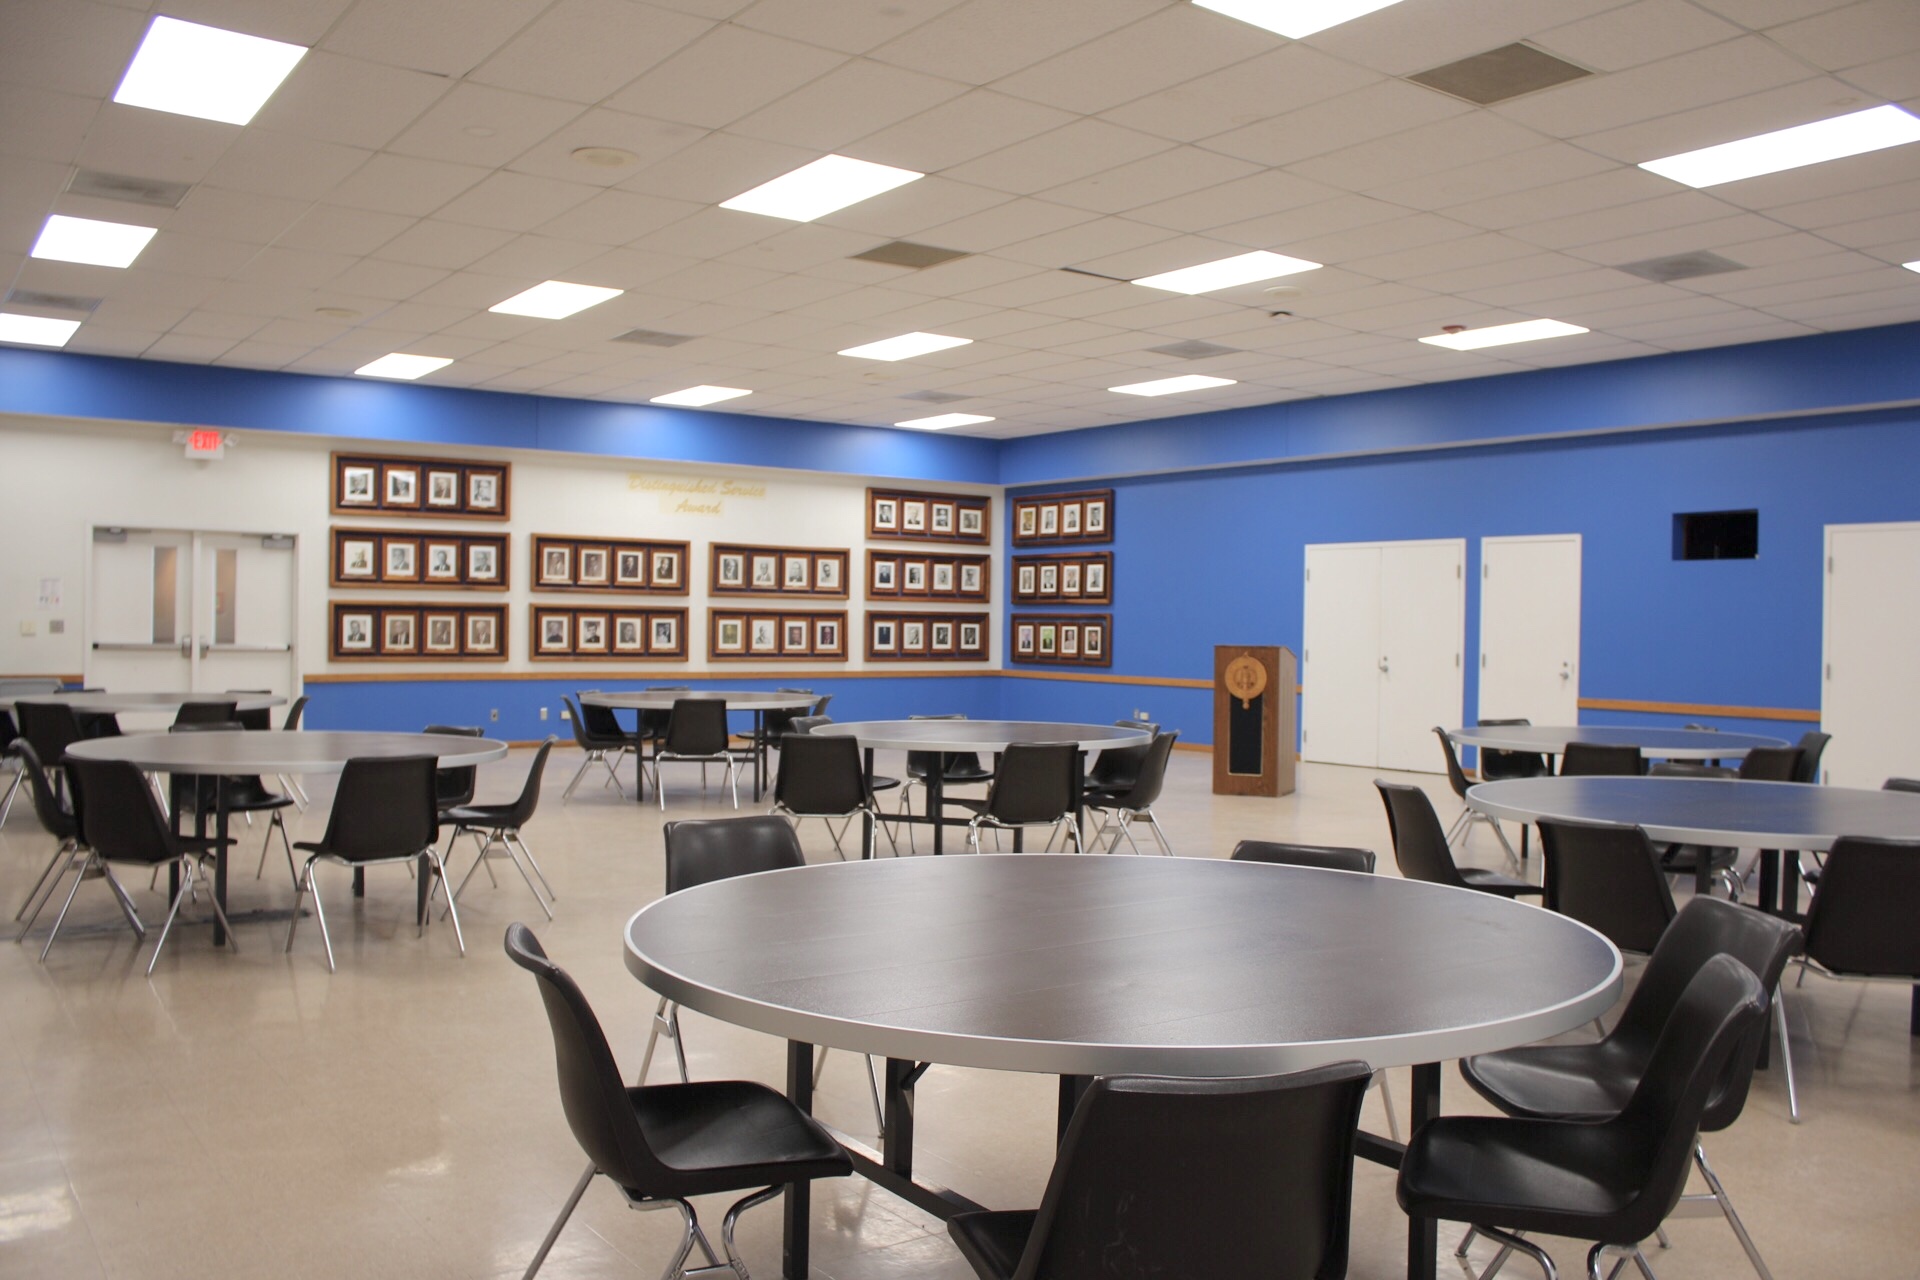 Live Oak Room showing tables, chairs, movable podium and photos of distinguished faculty member on 2 walls.